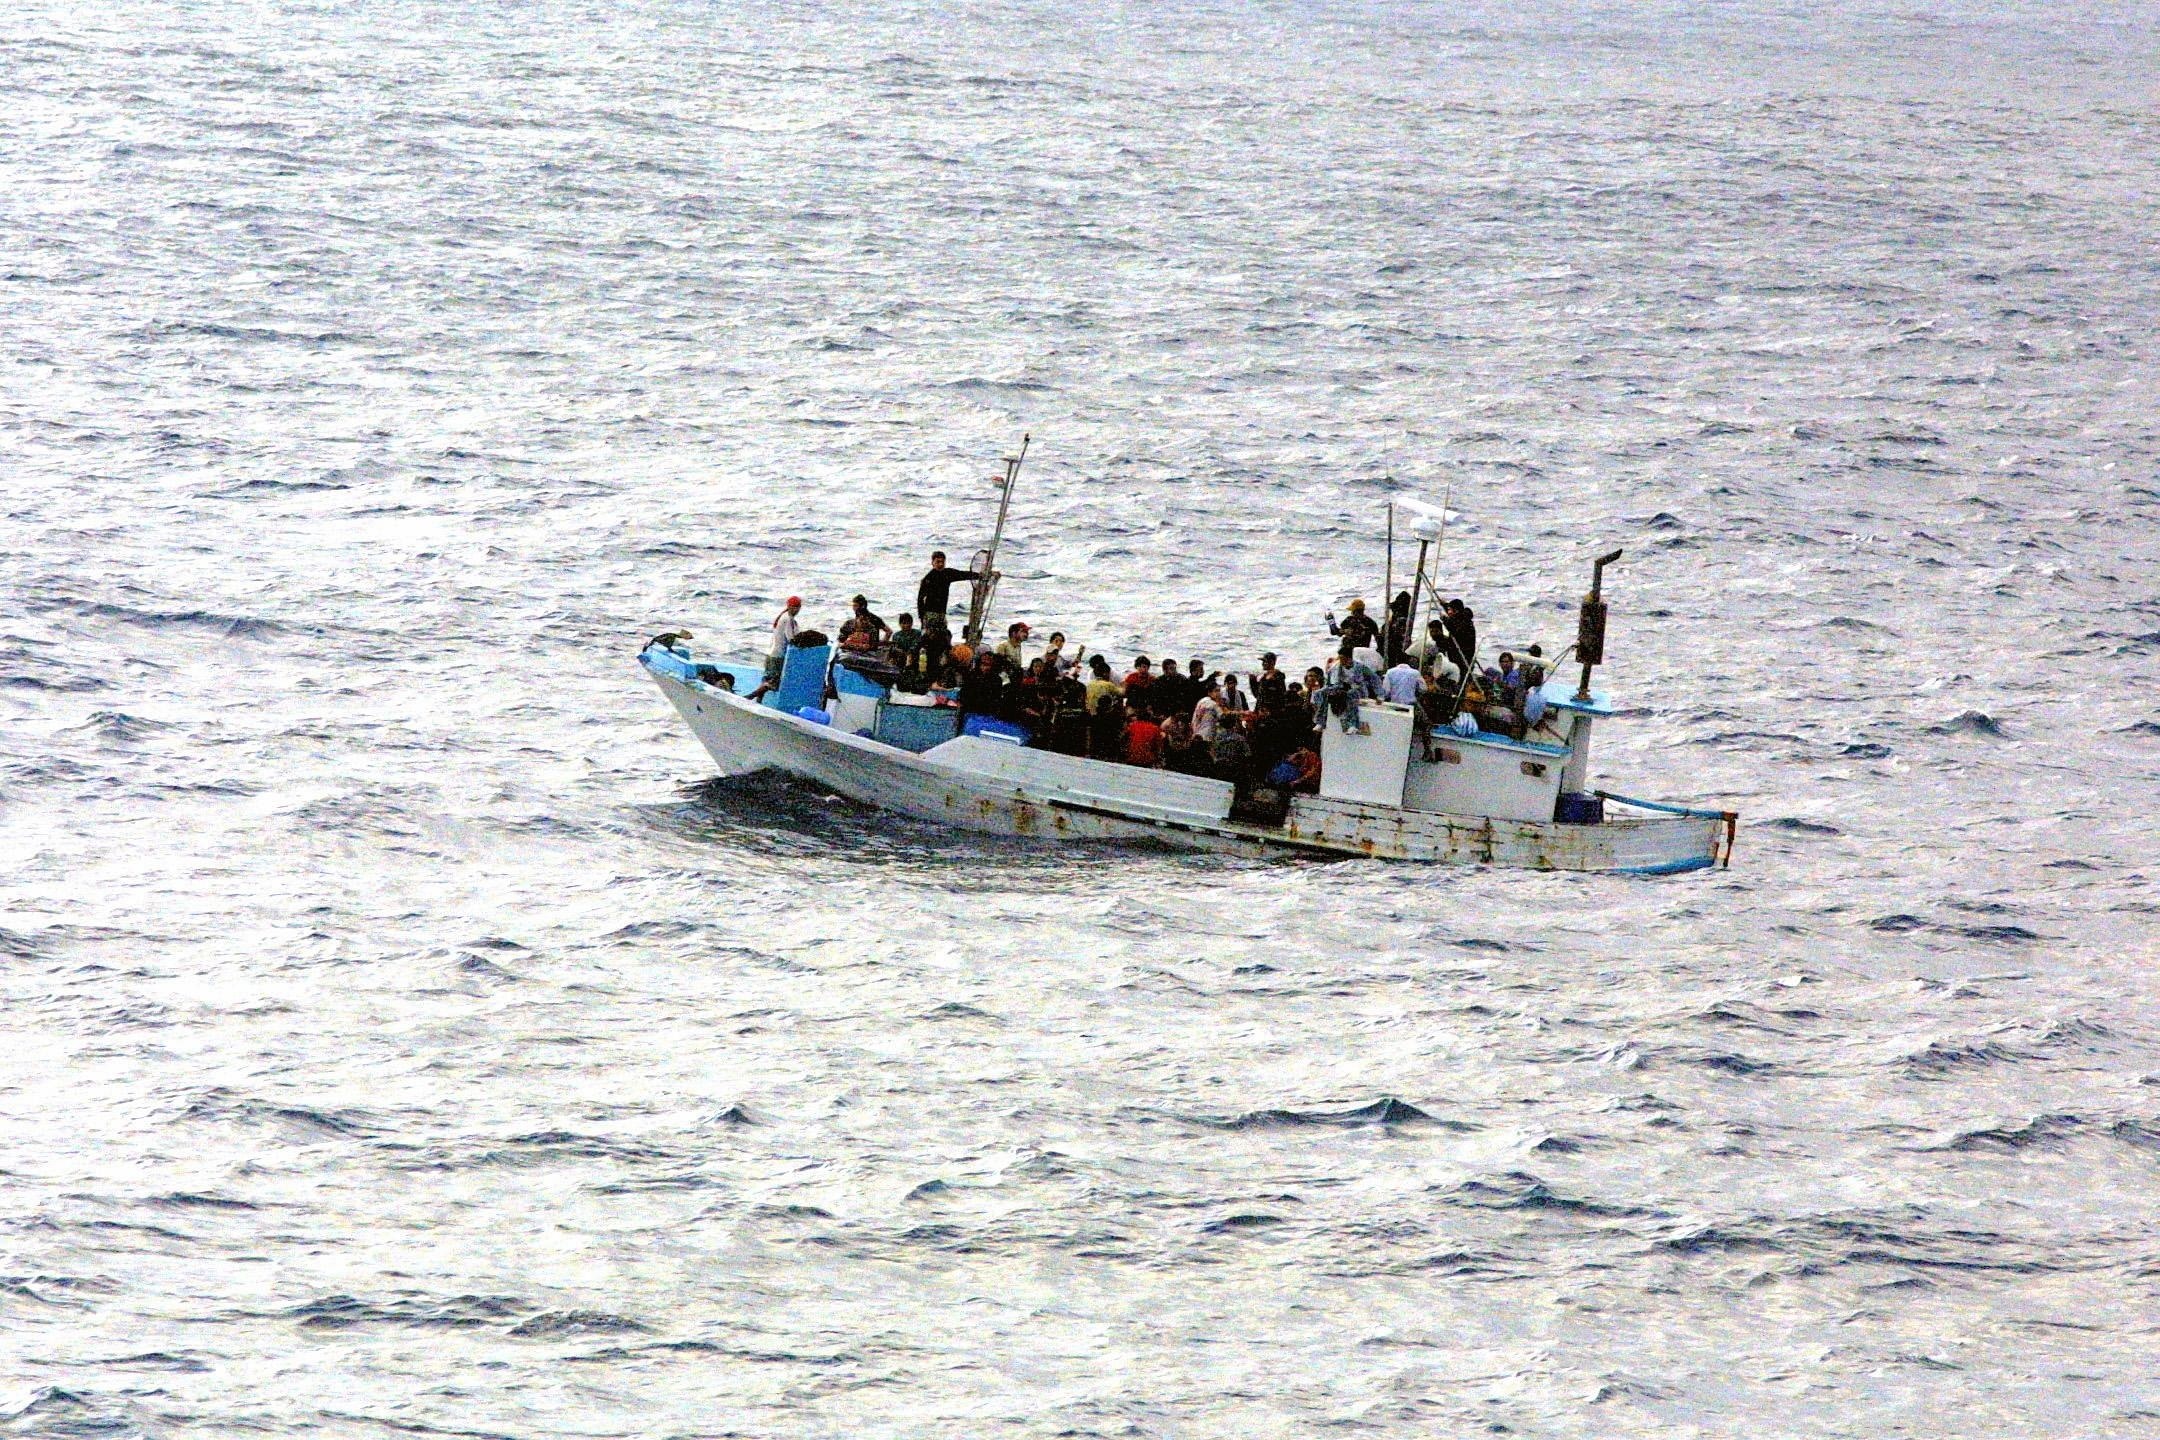 group of people riding on boat on body of water